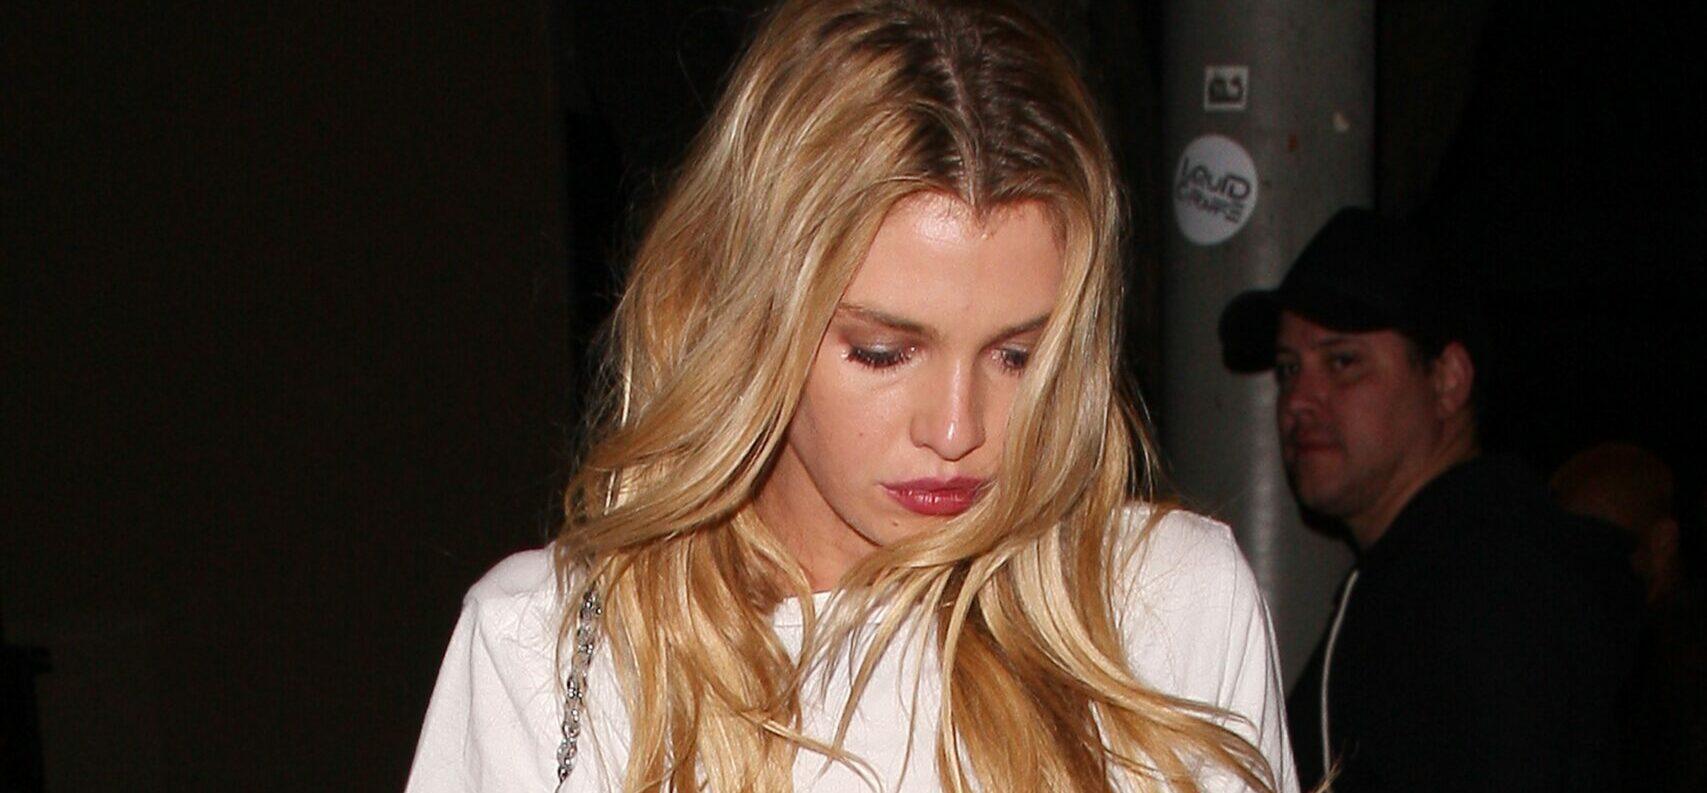 New Zealand model Stella Maxwell is spotted going to the Peppermint club to watch Jesse Jo Stark perform her music on stage